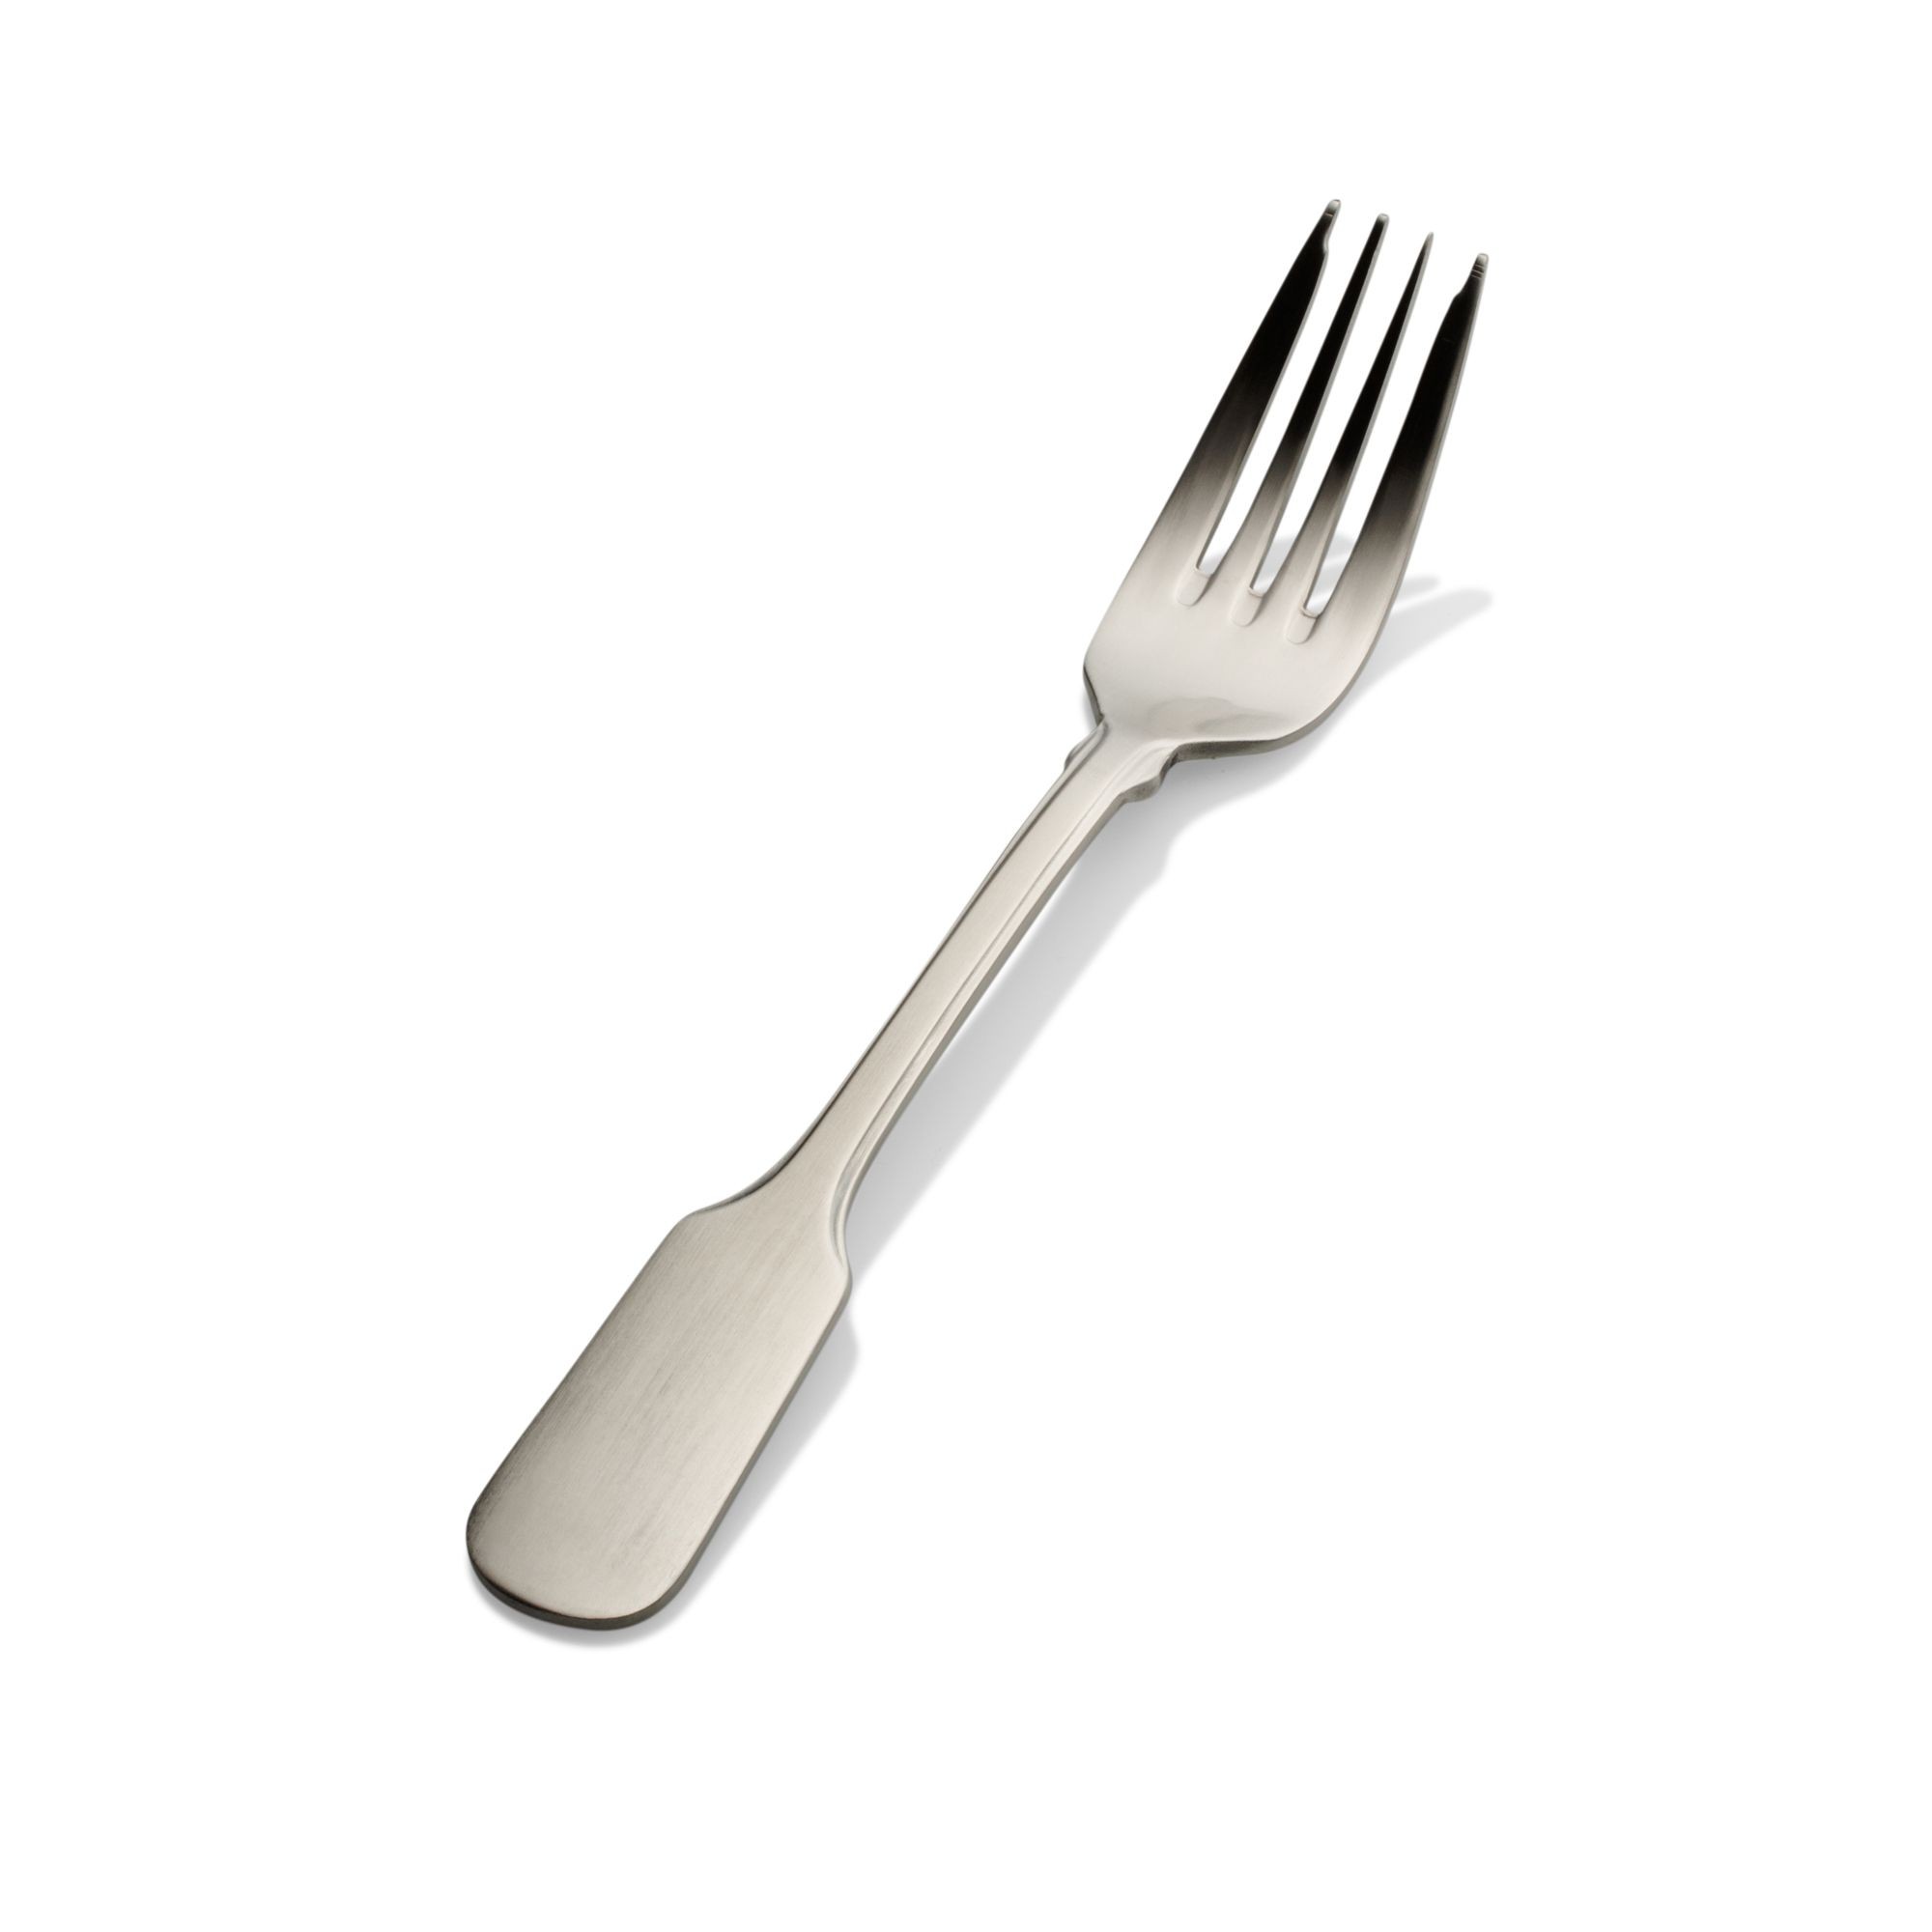 Bon Chef S1907 Liberty 18/8 Stainless Steel Salad and Dessert Fork